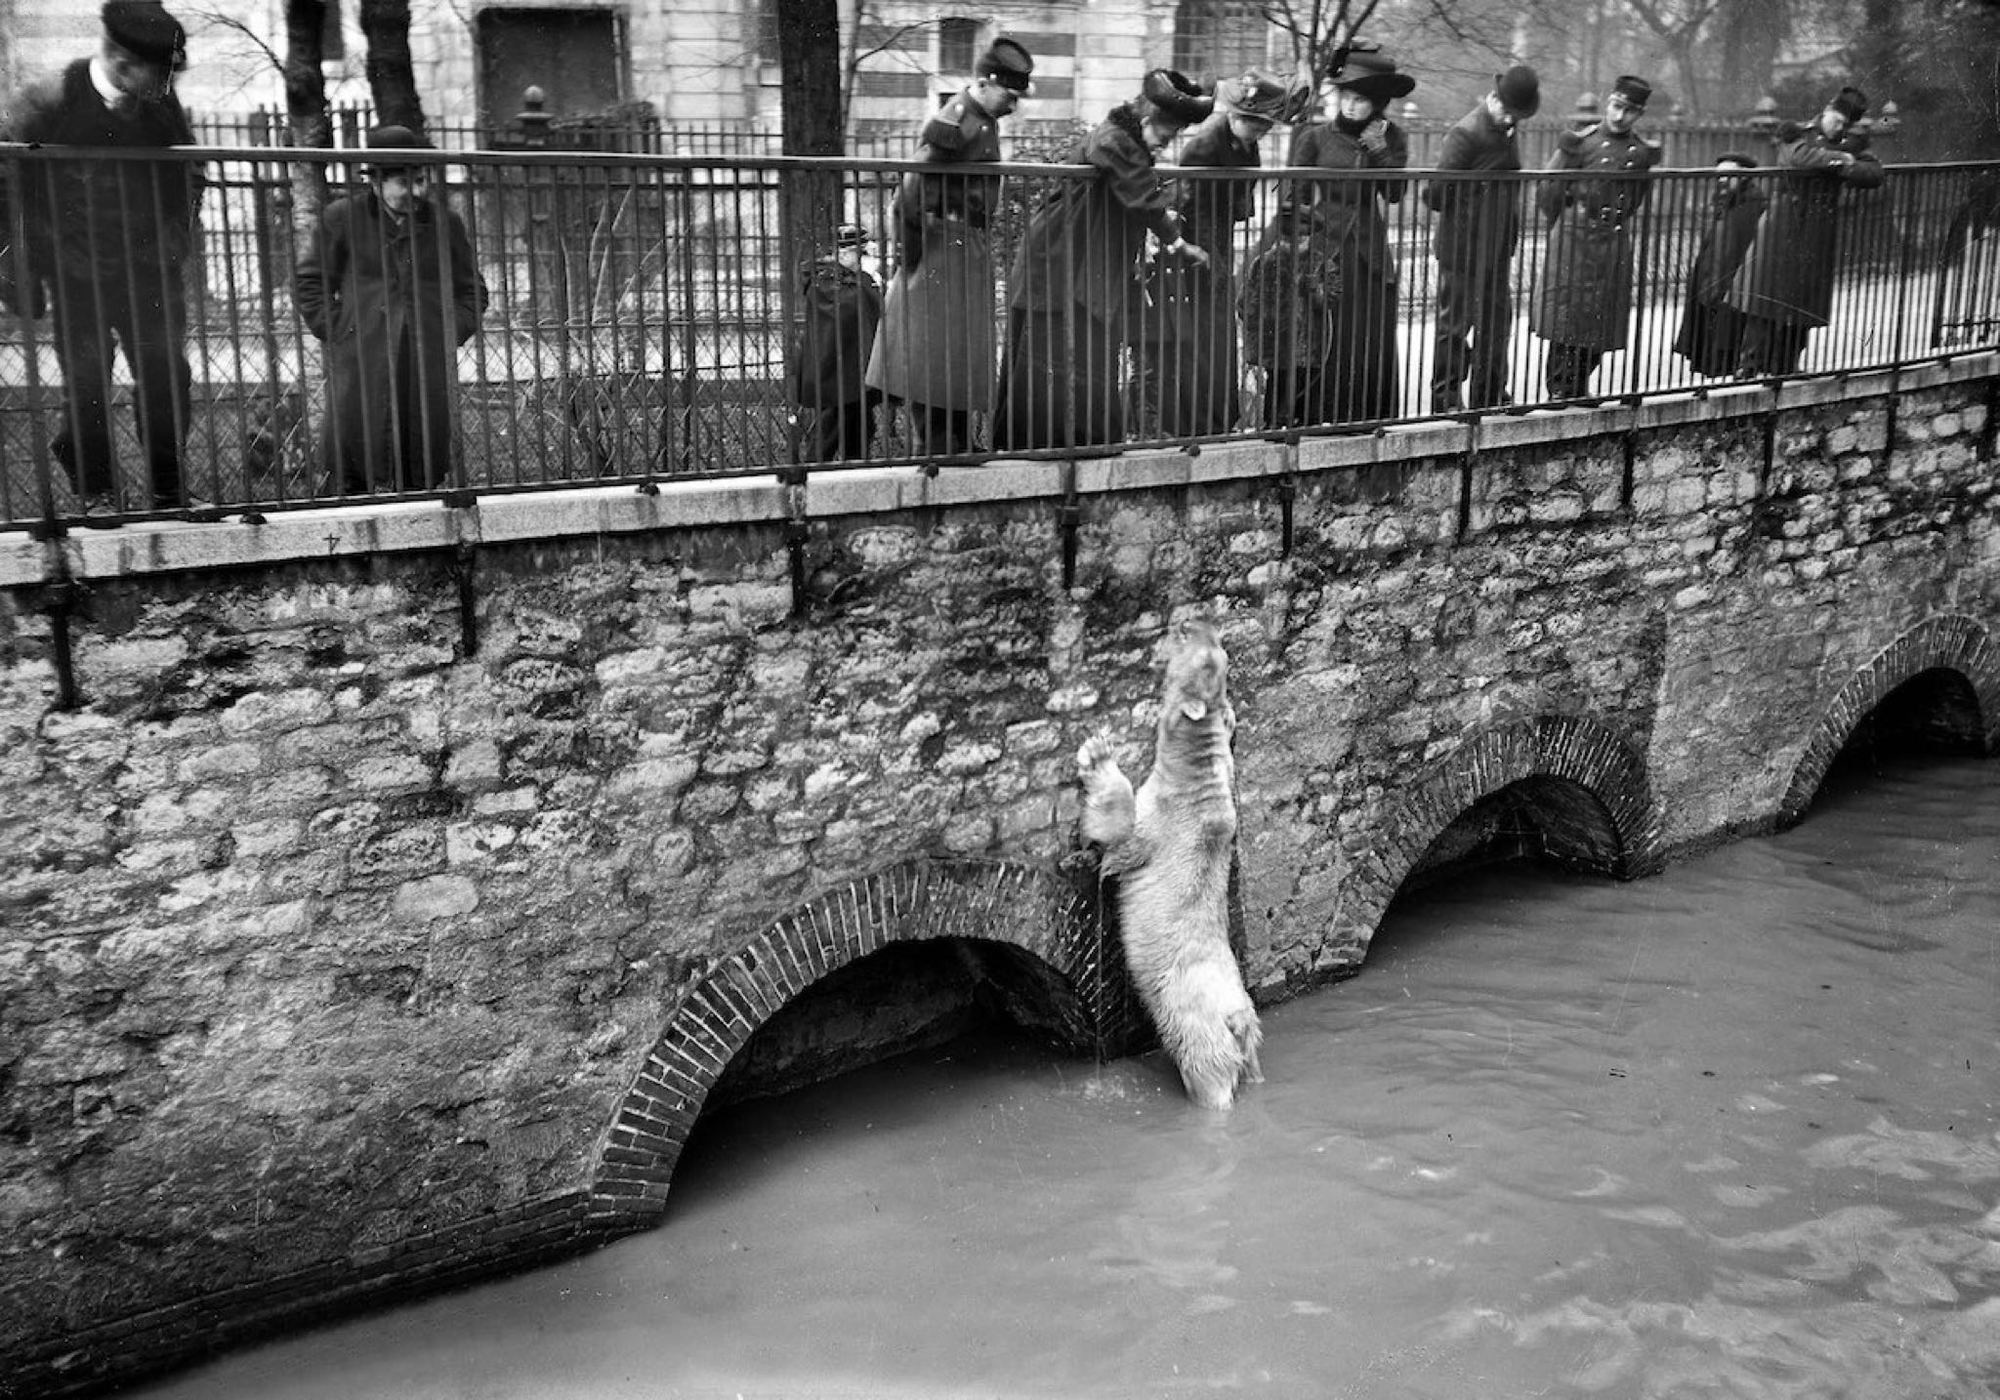 During the Paris flood of January 1910, a polar bear got stuck in his flooded enclosure.